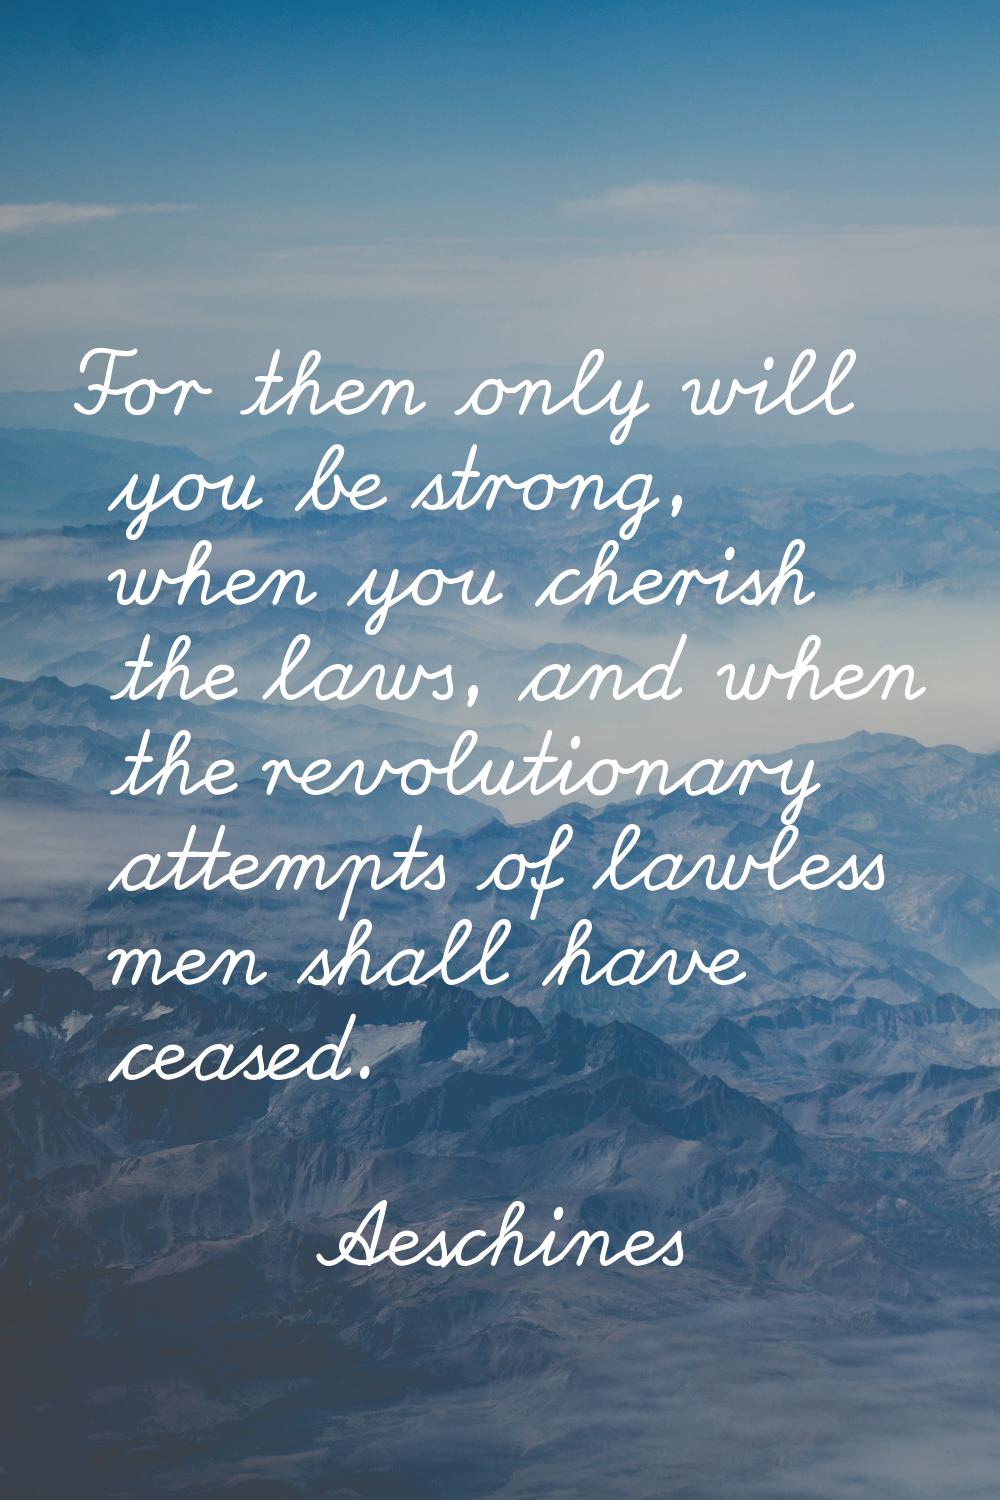 For then only will you be strong, when you cherish the laws, and when the revolutionary attempts of